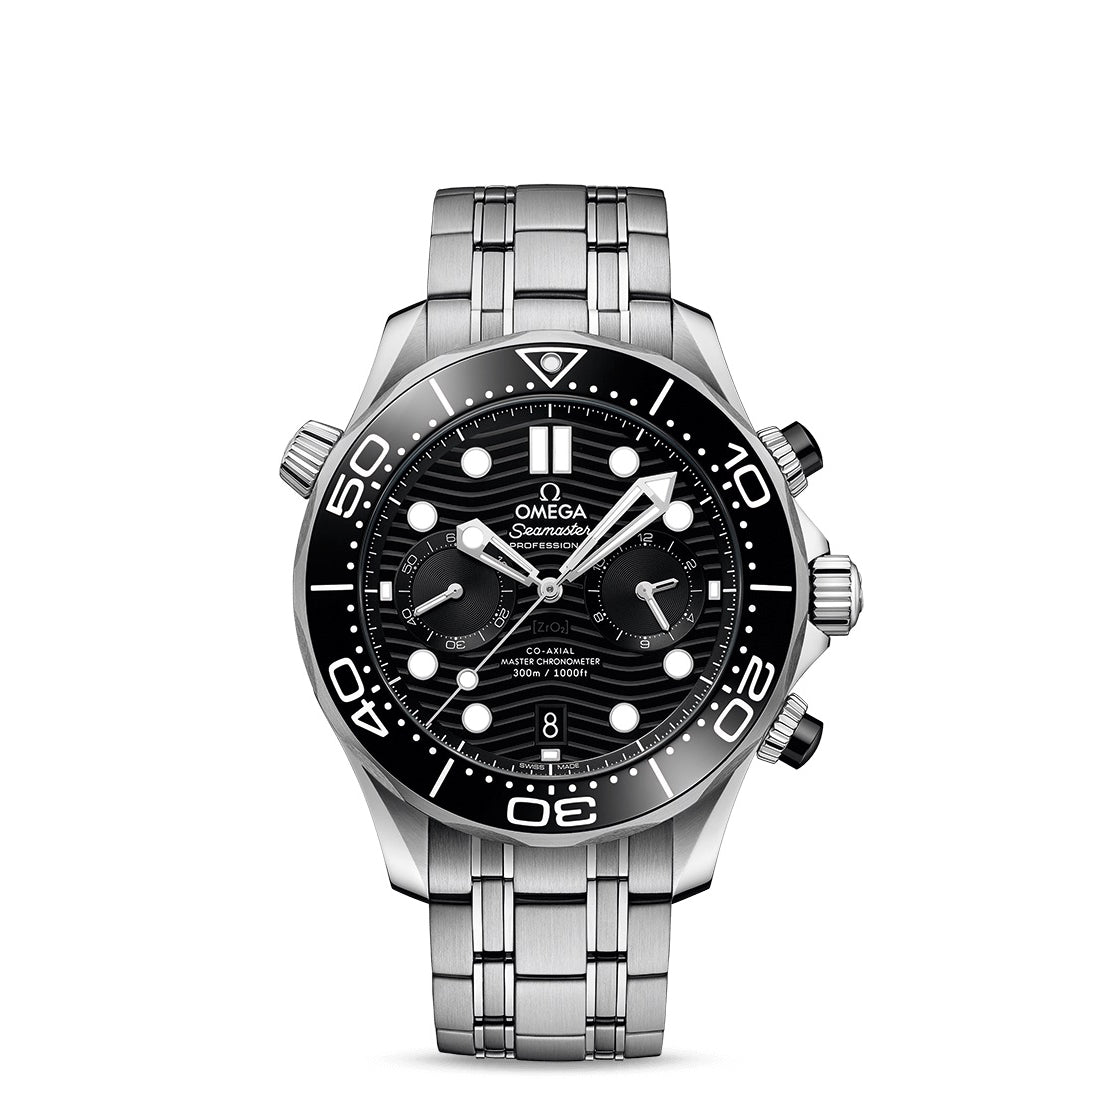 Omega Seamaster DIVER 300M CO‑AXIAL MASTER CHRONOMETER CHRONOGRAPH 44 MM 210.30.44.51.01.001